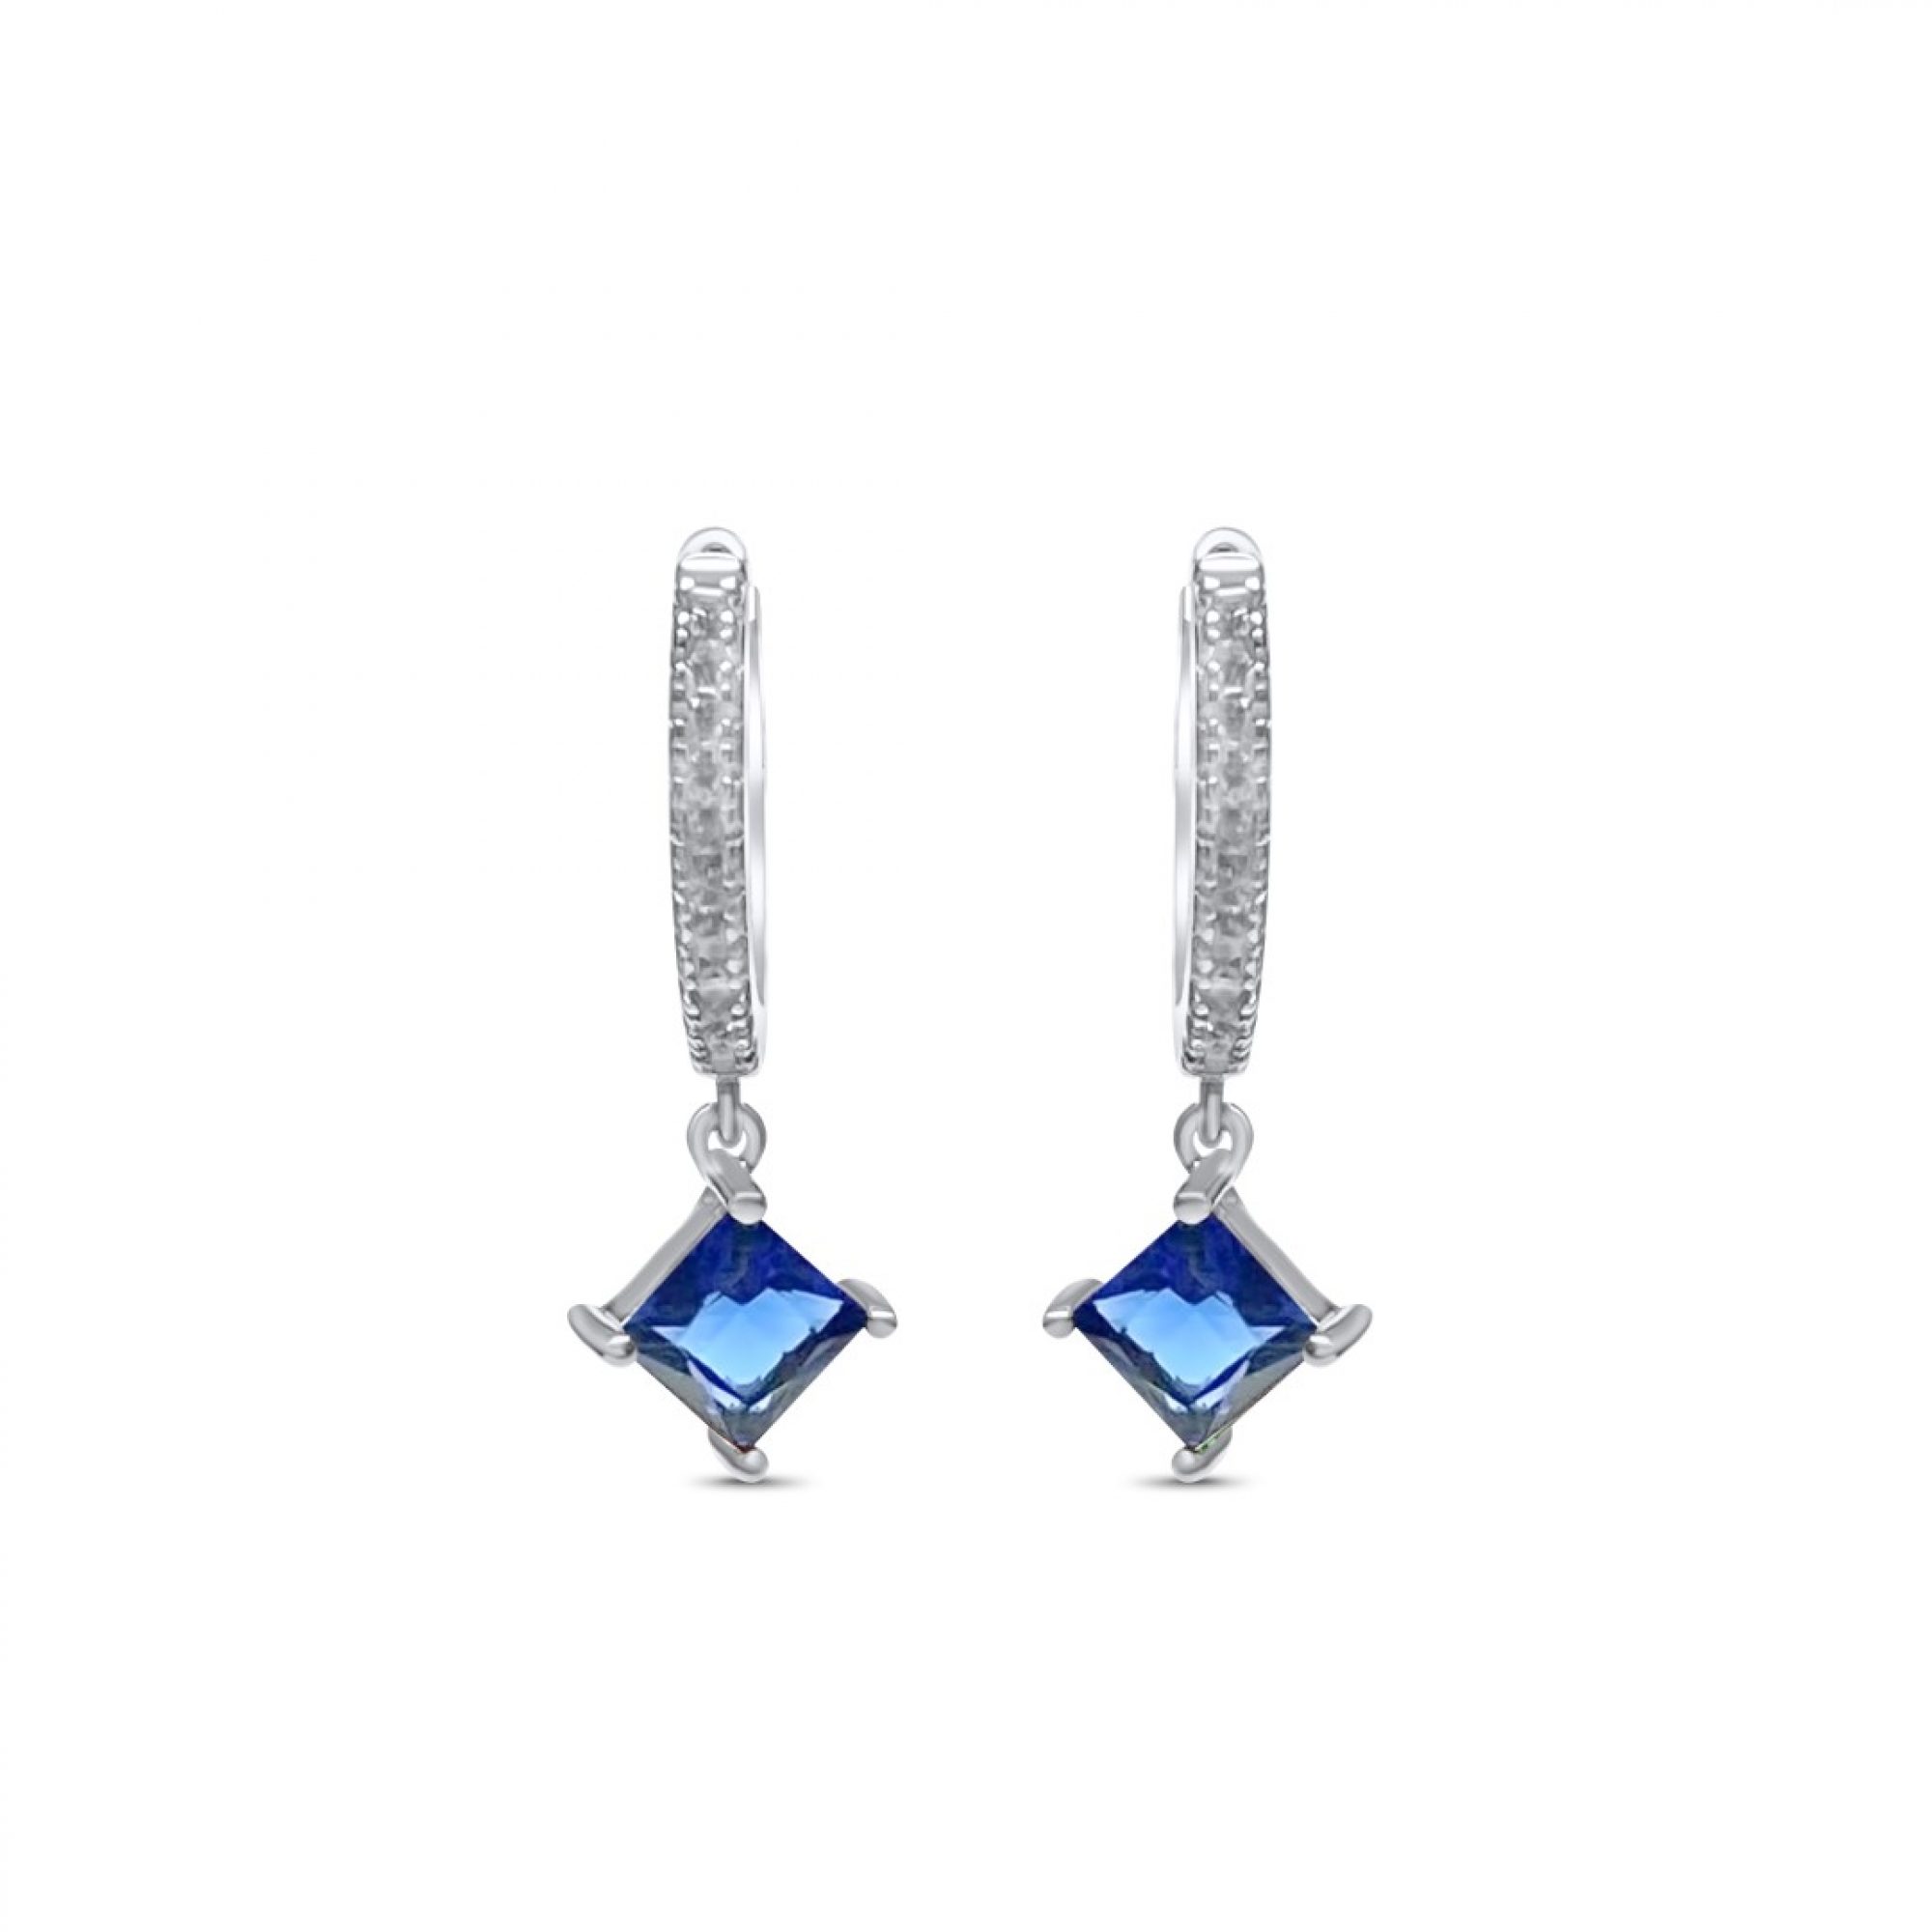 Silver earrings with sapphire and zircon stones